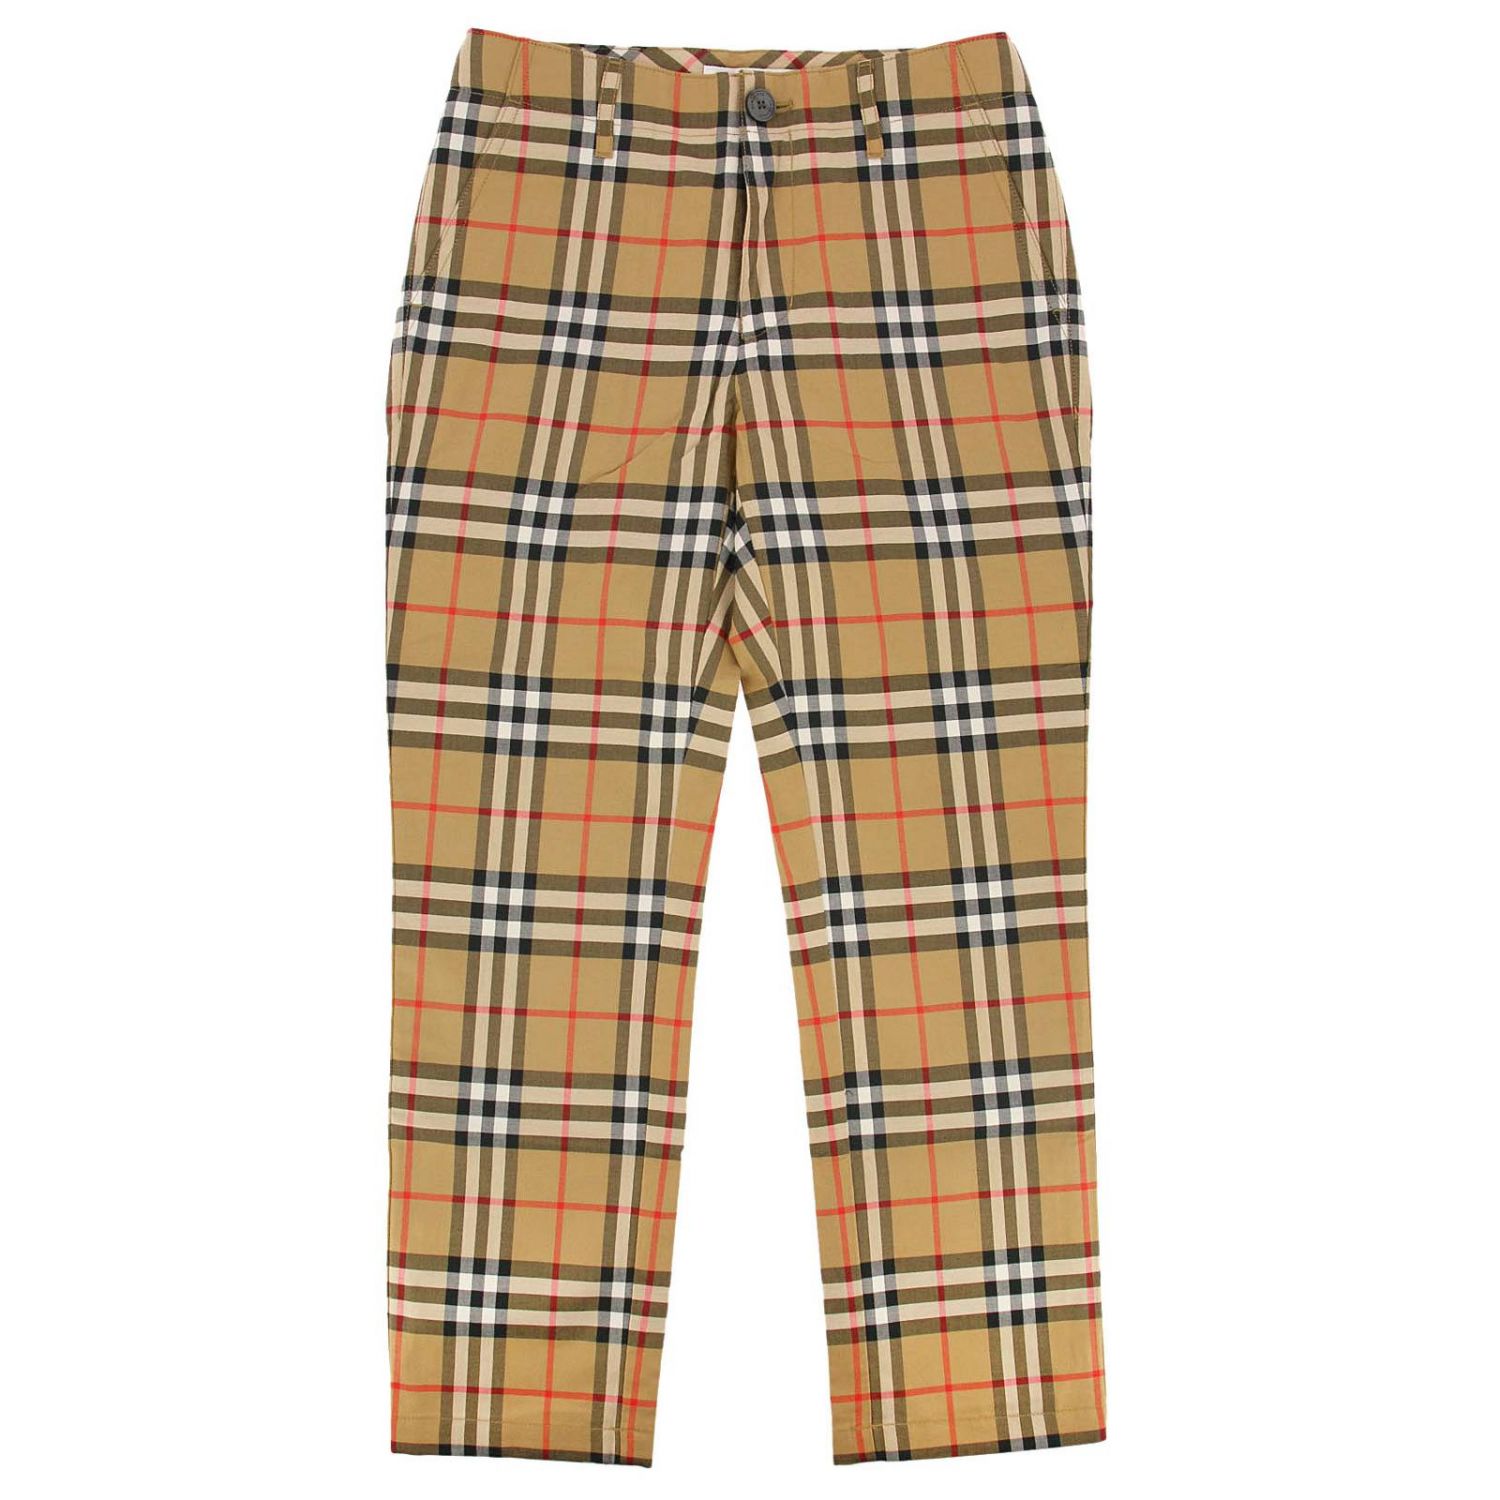 Burberry Outlet: Pants kids - Beige | Pants Burberry 8001550 GIGLIO.COM